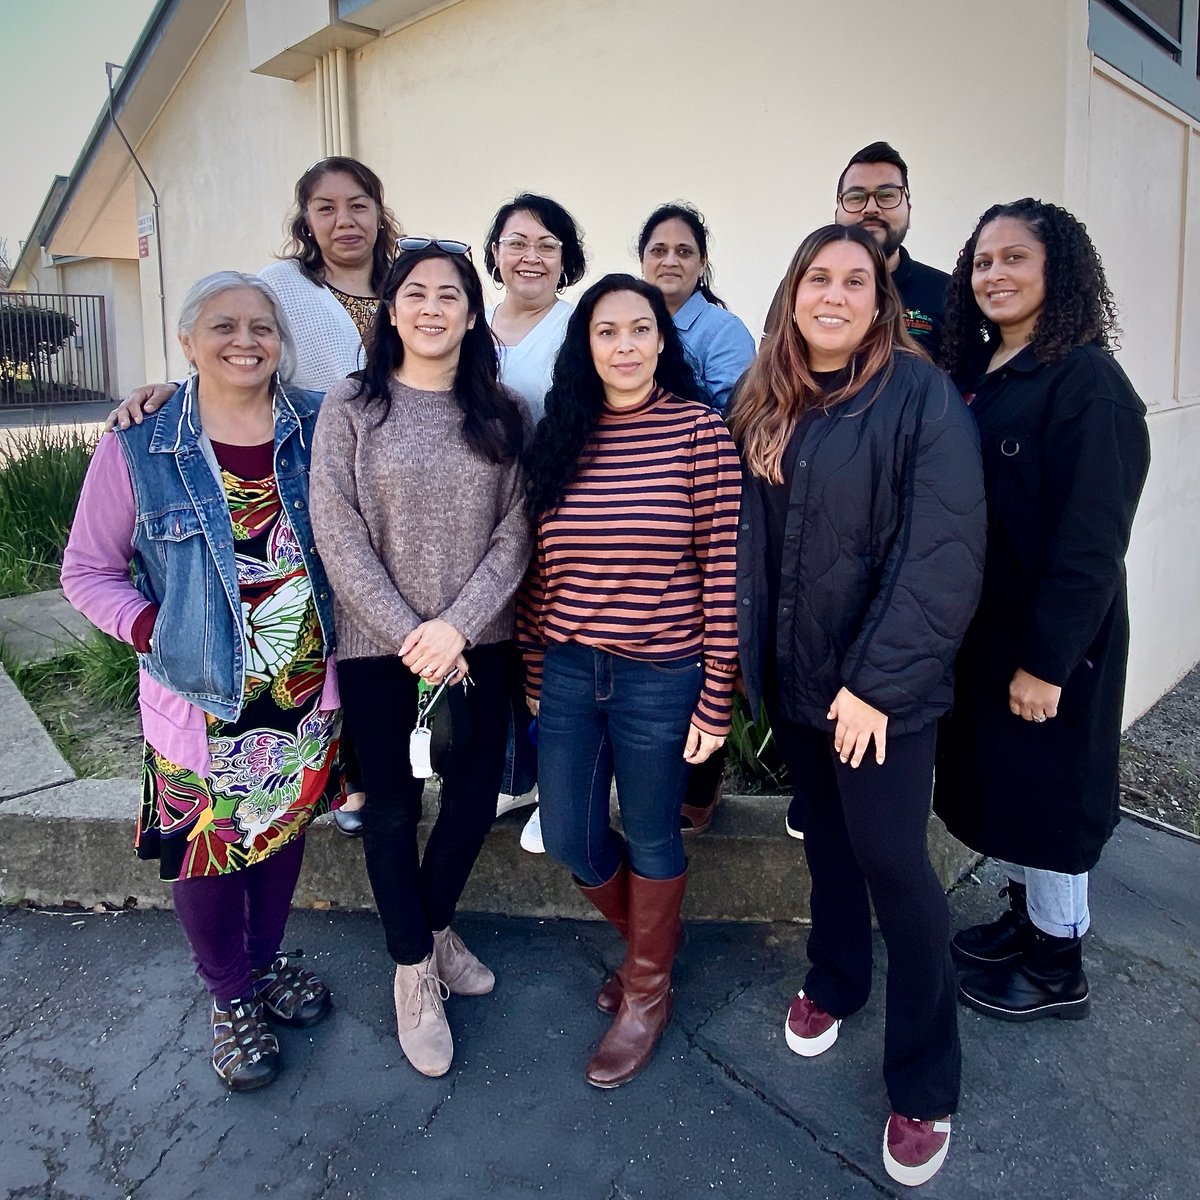 Introducing our wonderful Family Service Assistants (FSA)! 👨‍👩‍👧‍👦💕 They too are the heart and soul of our organization, providing compassionate care and support to families in need. 🏠❤️

Thanks for all your hard work!

#NHUSD #FSA #FamilyServiceAssistant #UCFC #ServingProudly